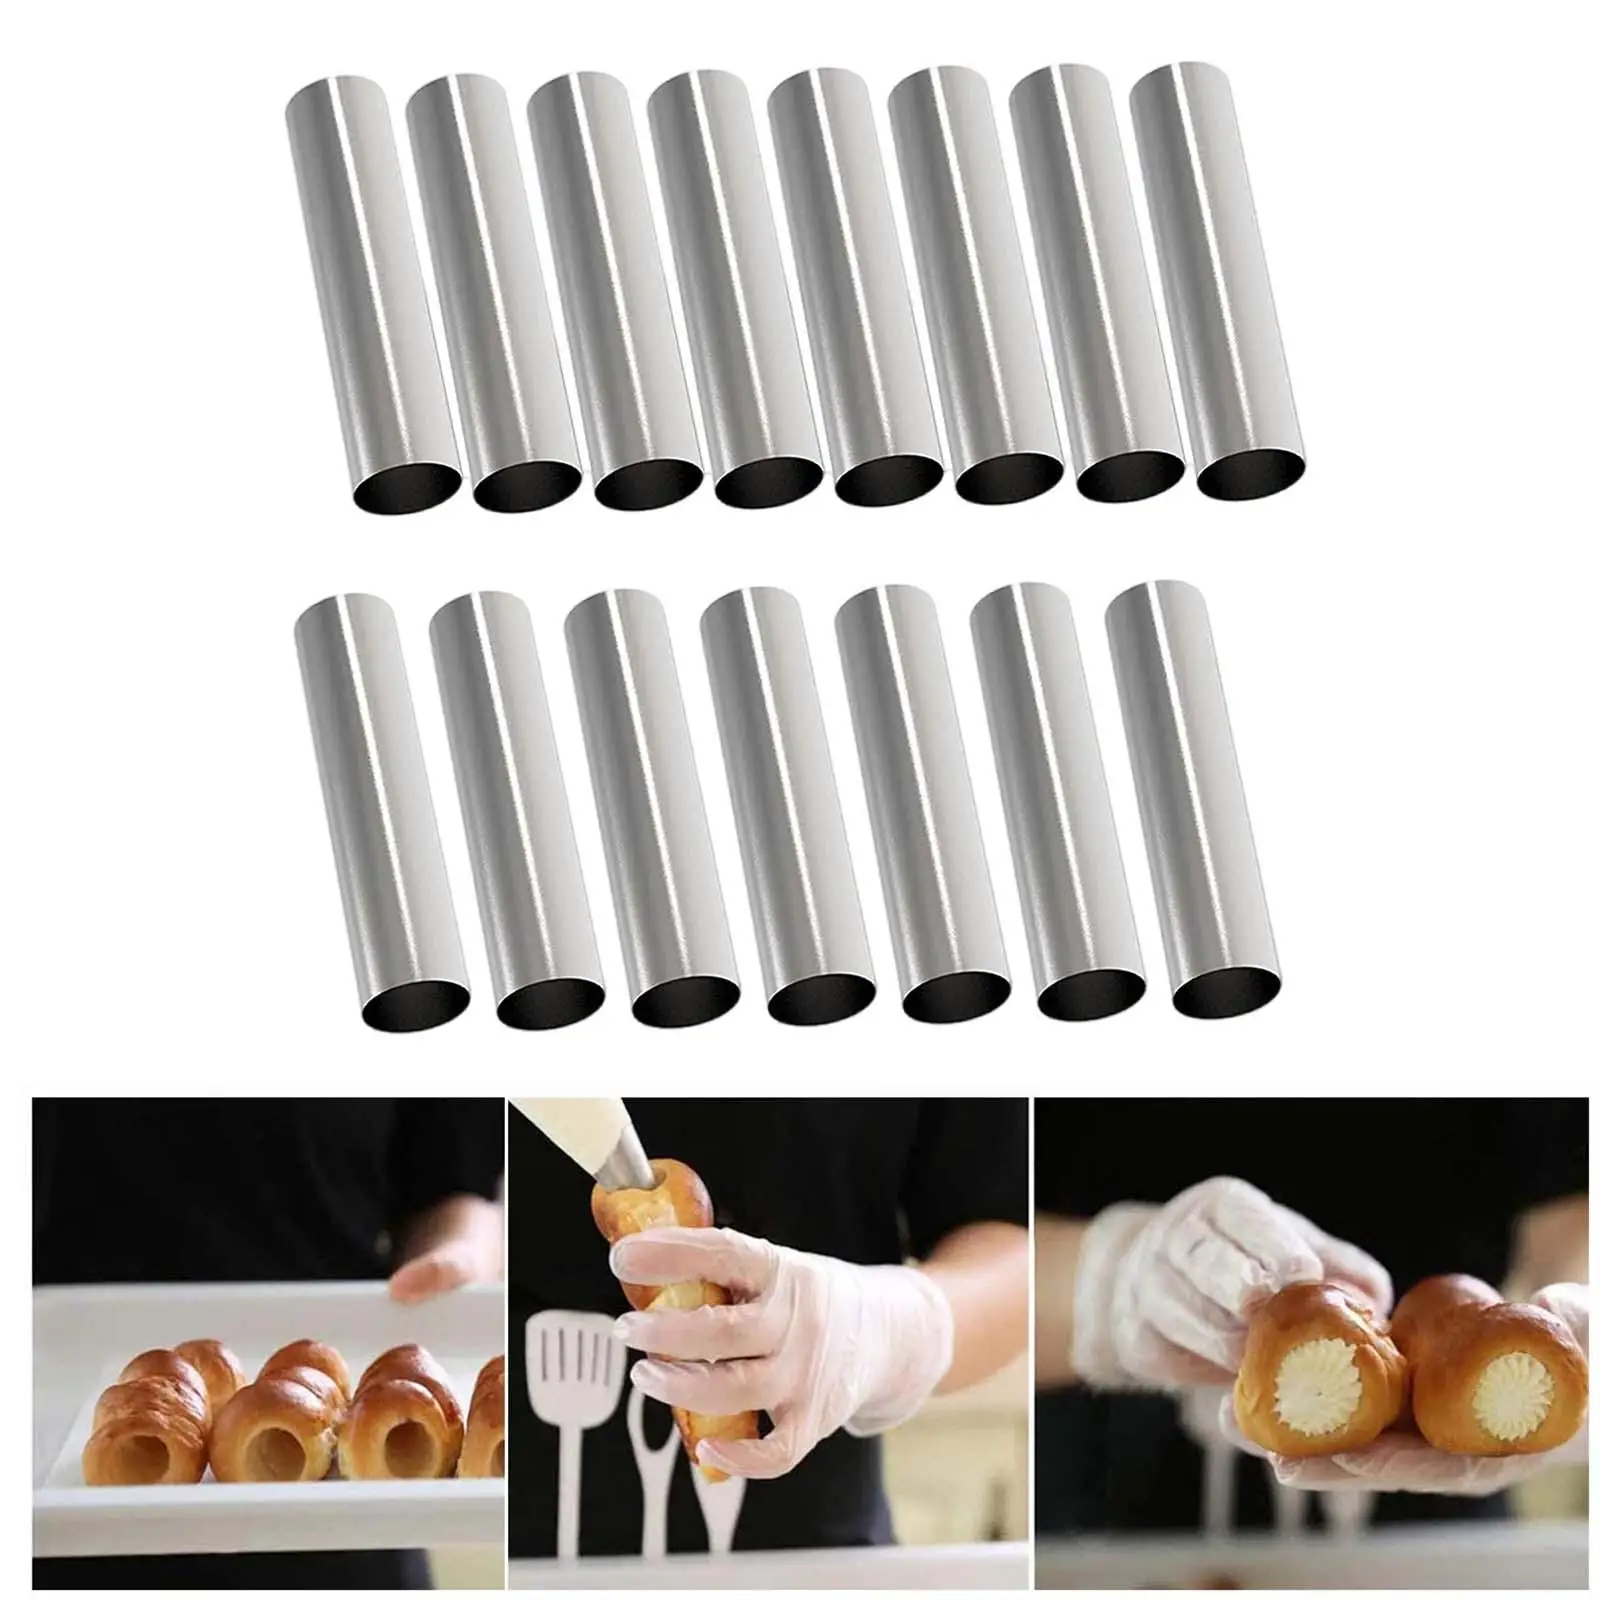 15 Pcs/Lot Cannoli Form Tubes Cannoli Tubes Shells for Ice Cream Cones Pastry Pancake Horn Molds Stainless Steel Roll Cones Kit